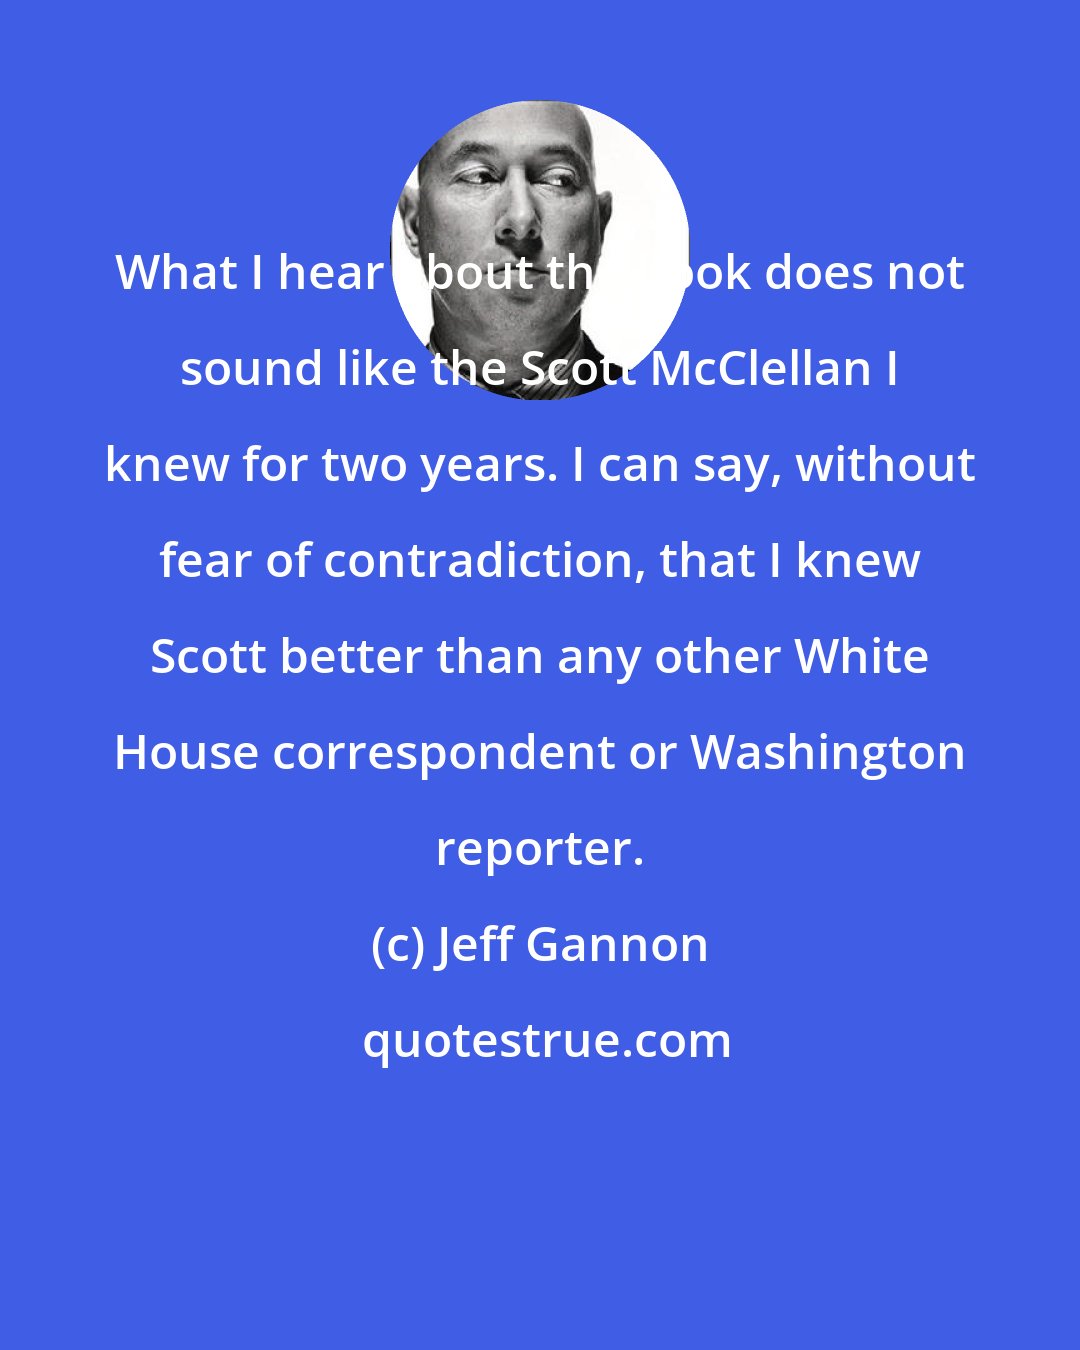 Jeff Gannon: What I hear about the book does not sound like the Scott McClellan I knew for two years. I can say, without fear of contradiction, that I knew Scott better than any other White House correspondent or Washington reporter.